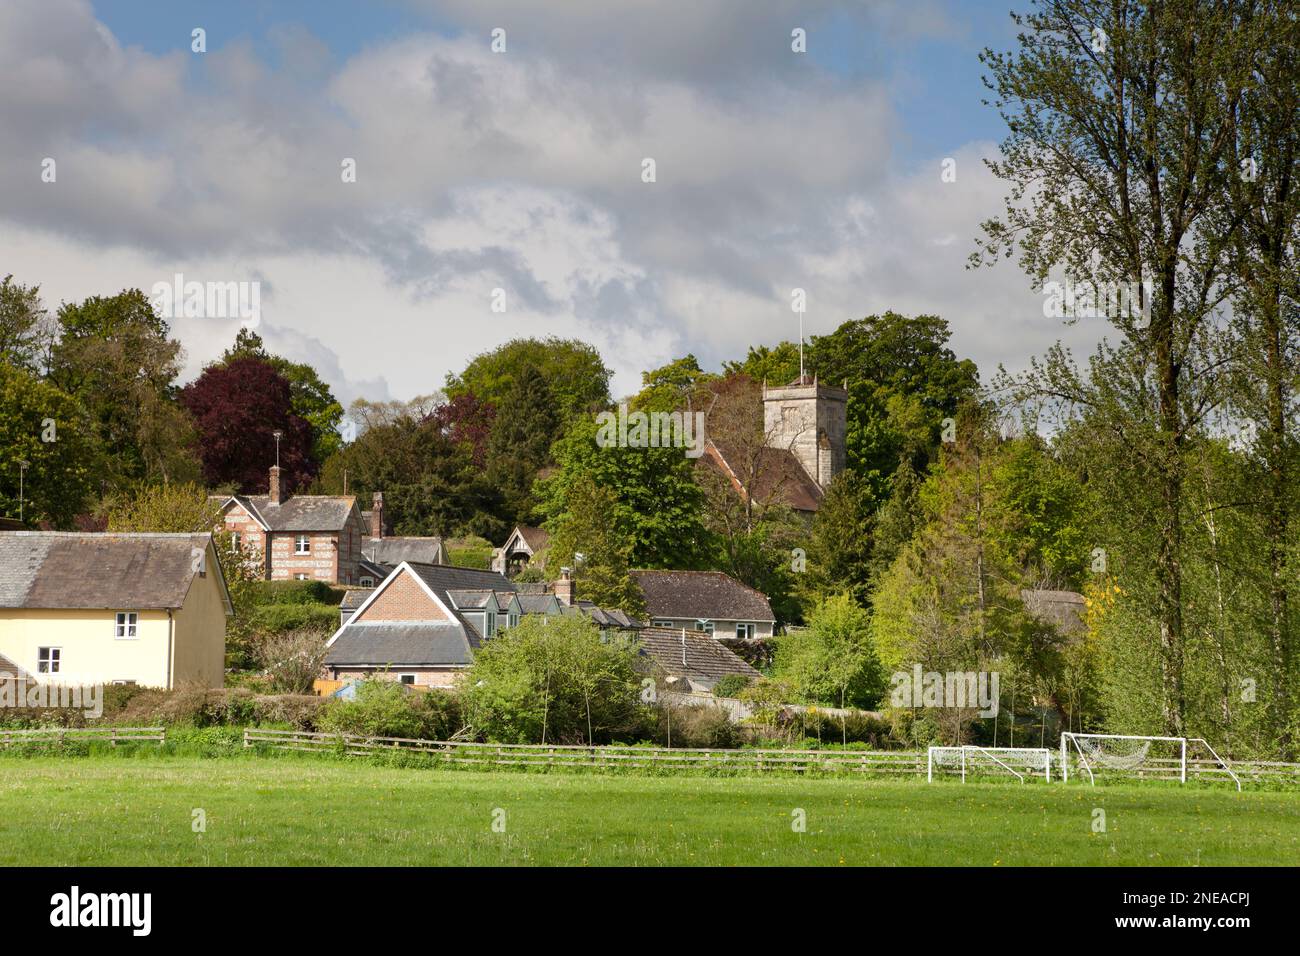 The village of Ebbesbourne Wake in the Chalke Valley, Wiltshire. Stock Photo